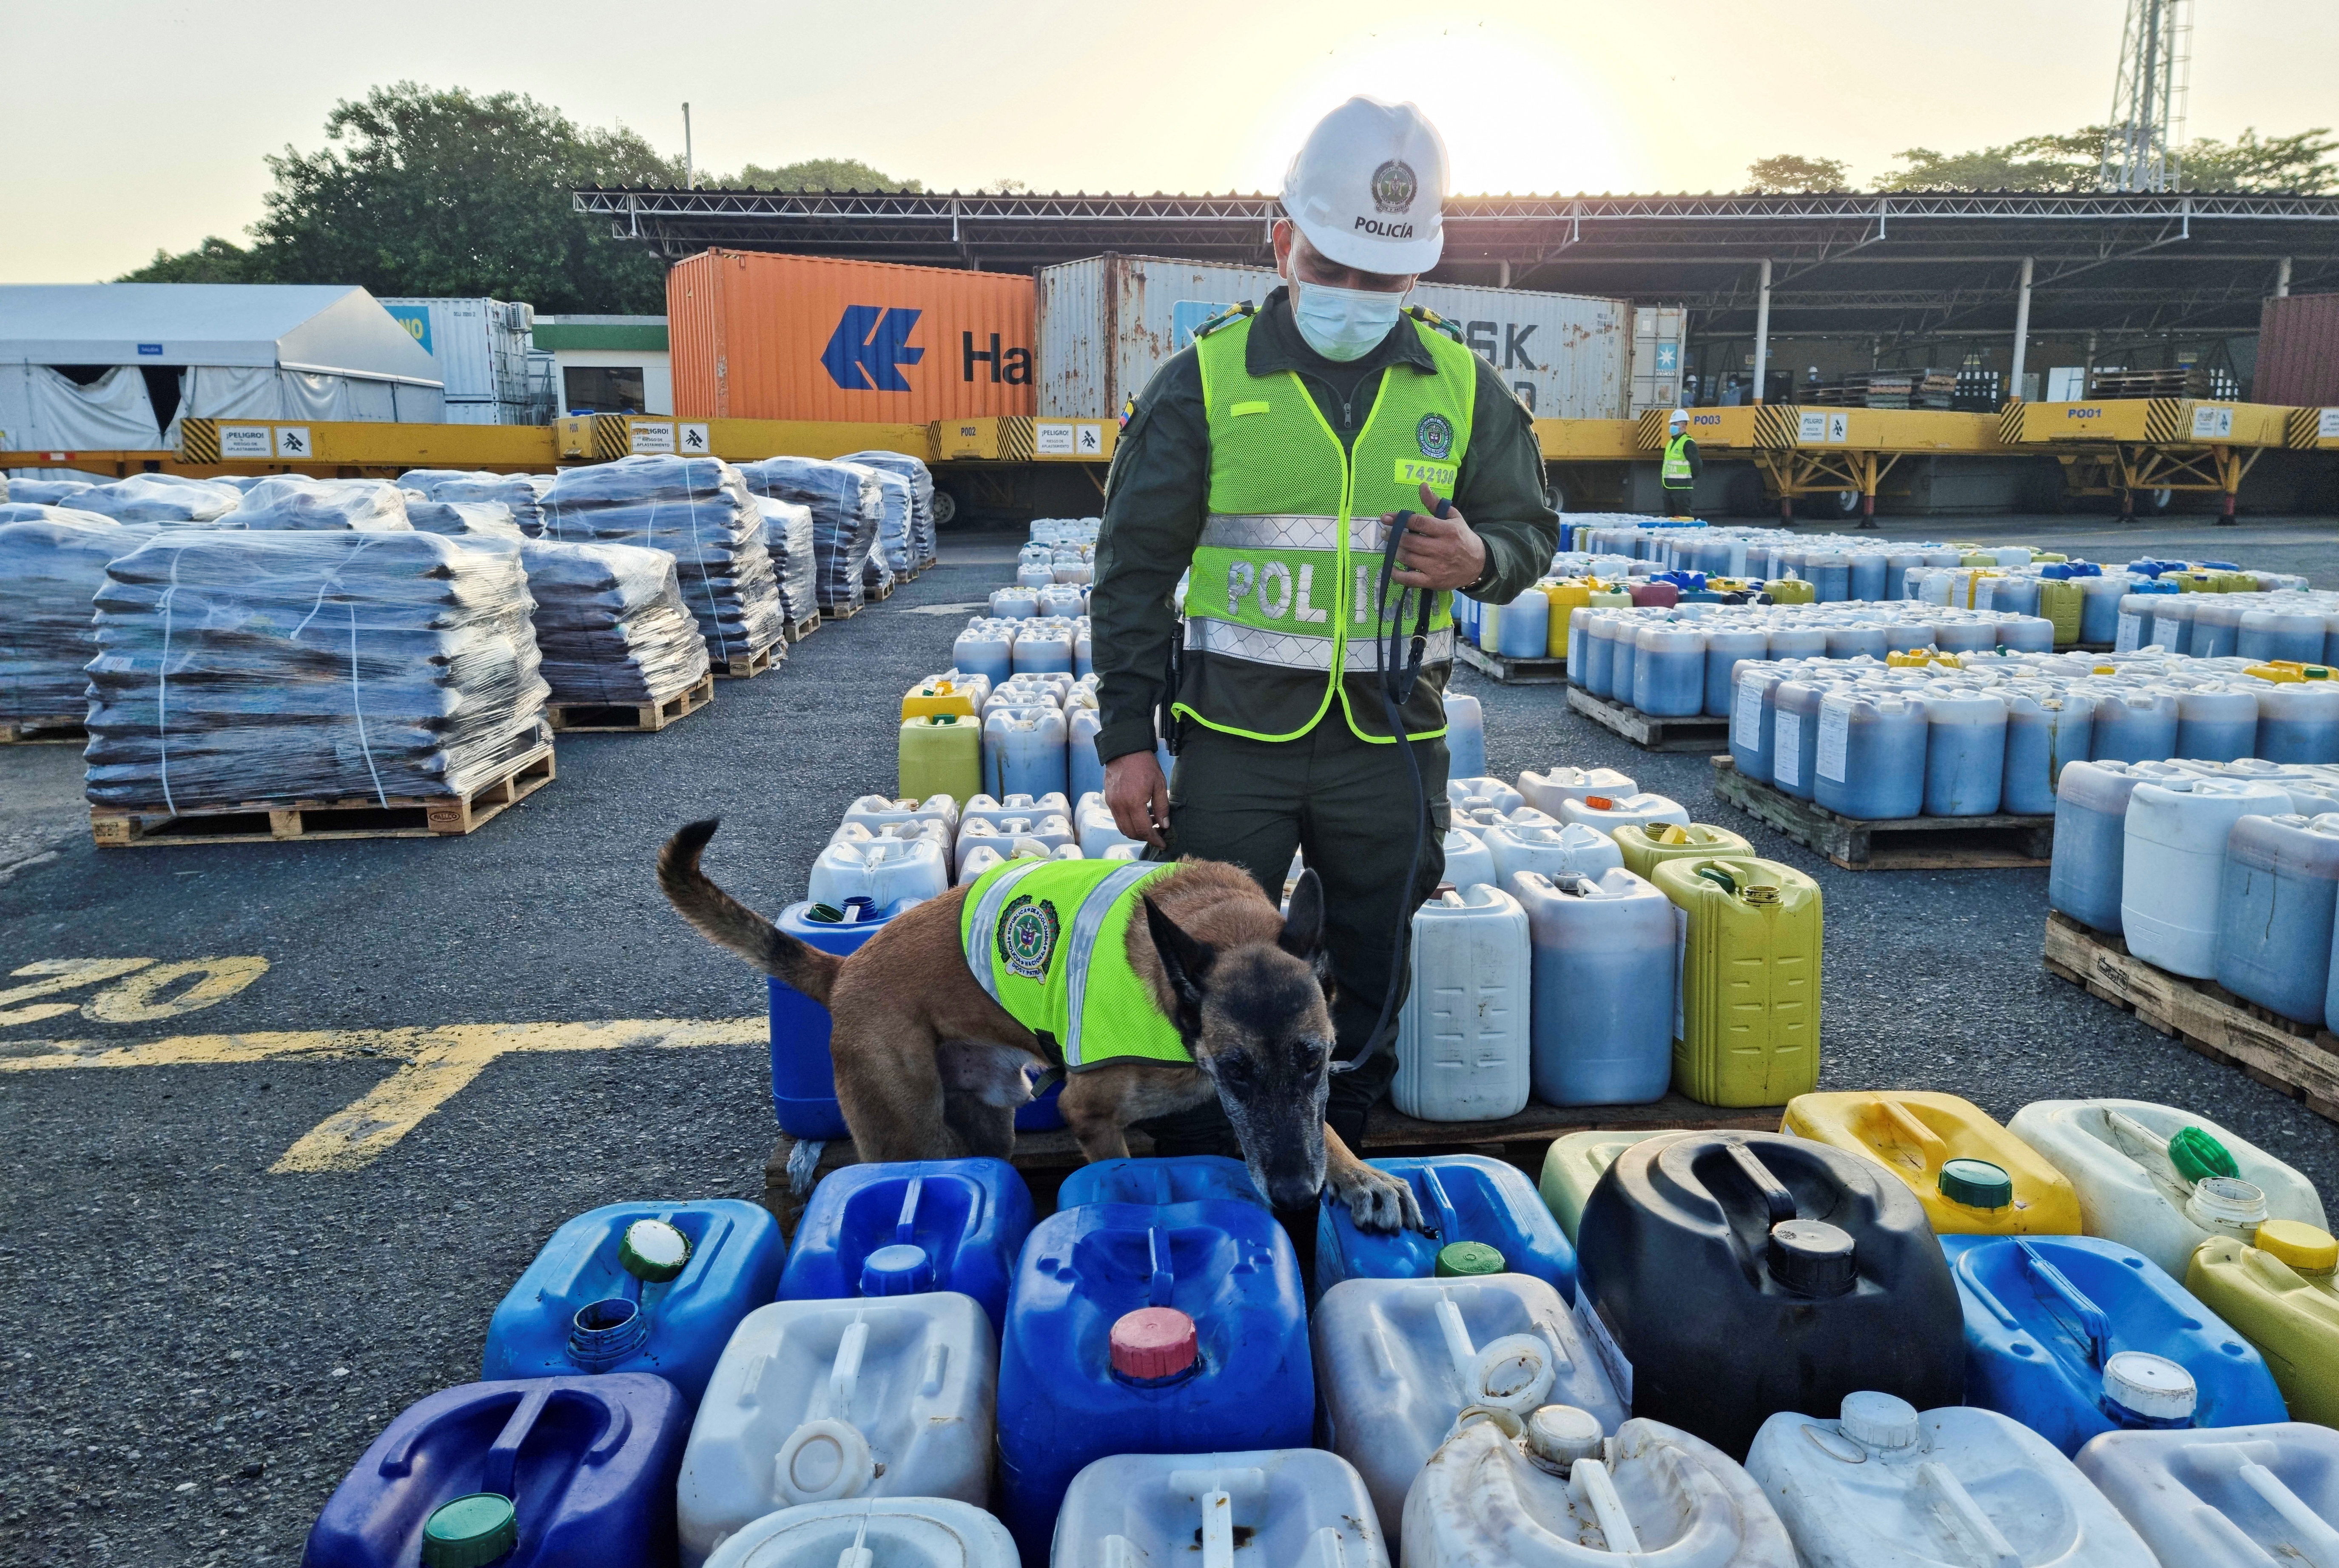 A drug-sniffing dog sniffs barrels that authorities say contain cocaine dissolved in chemical fertilizers and honey, in Cartagena